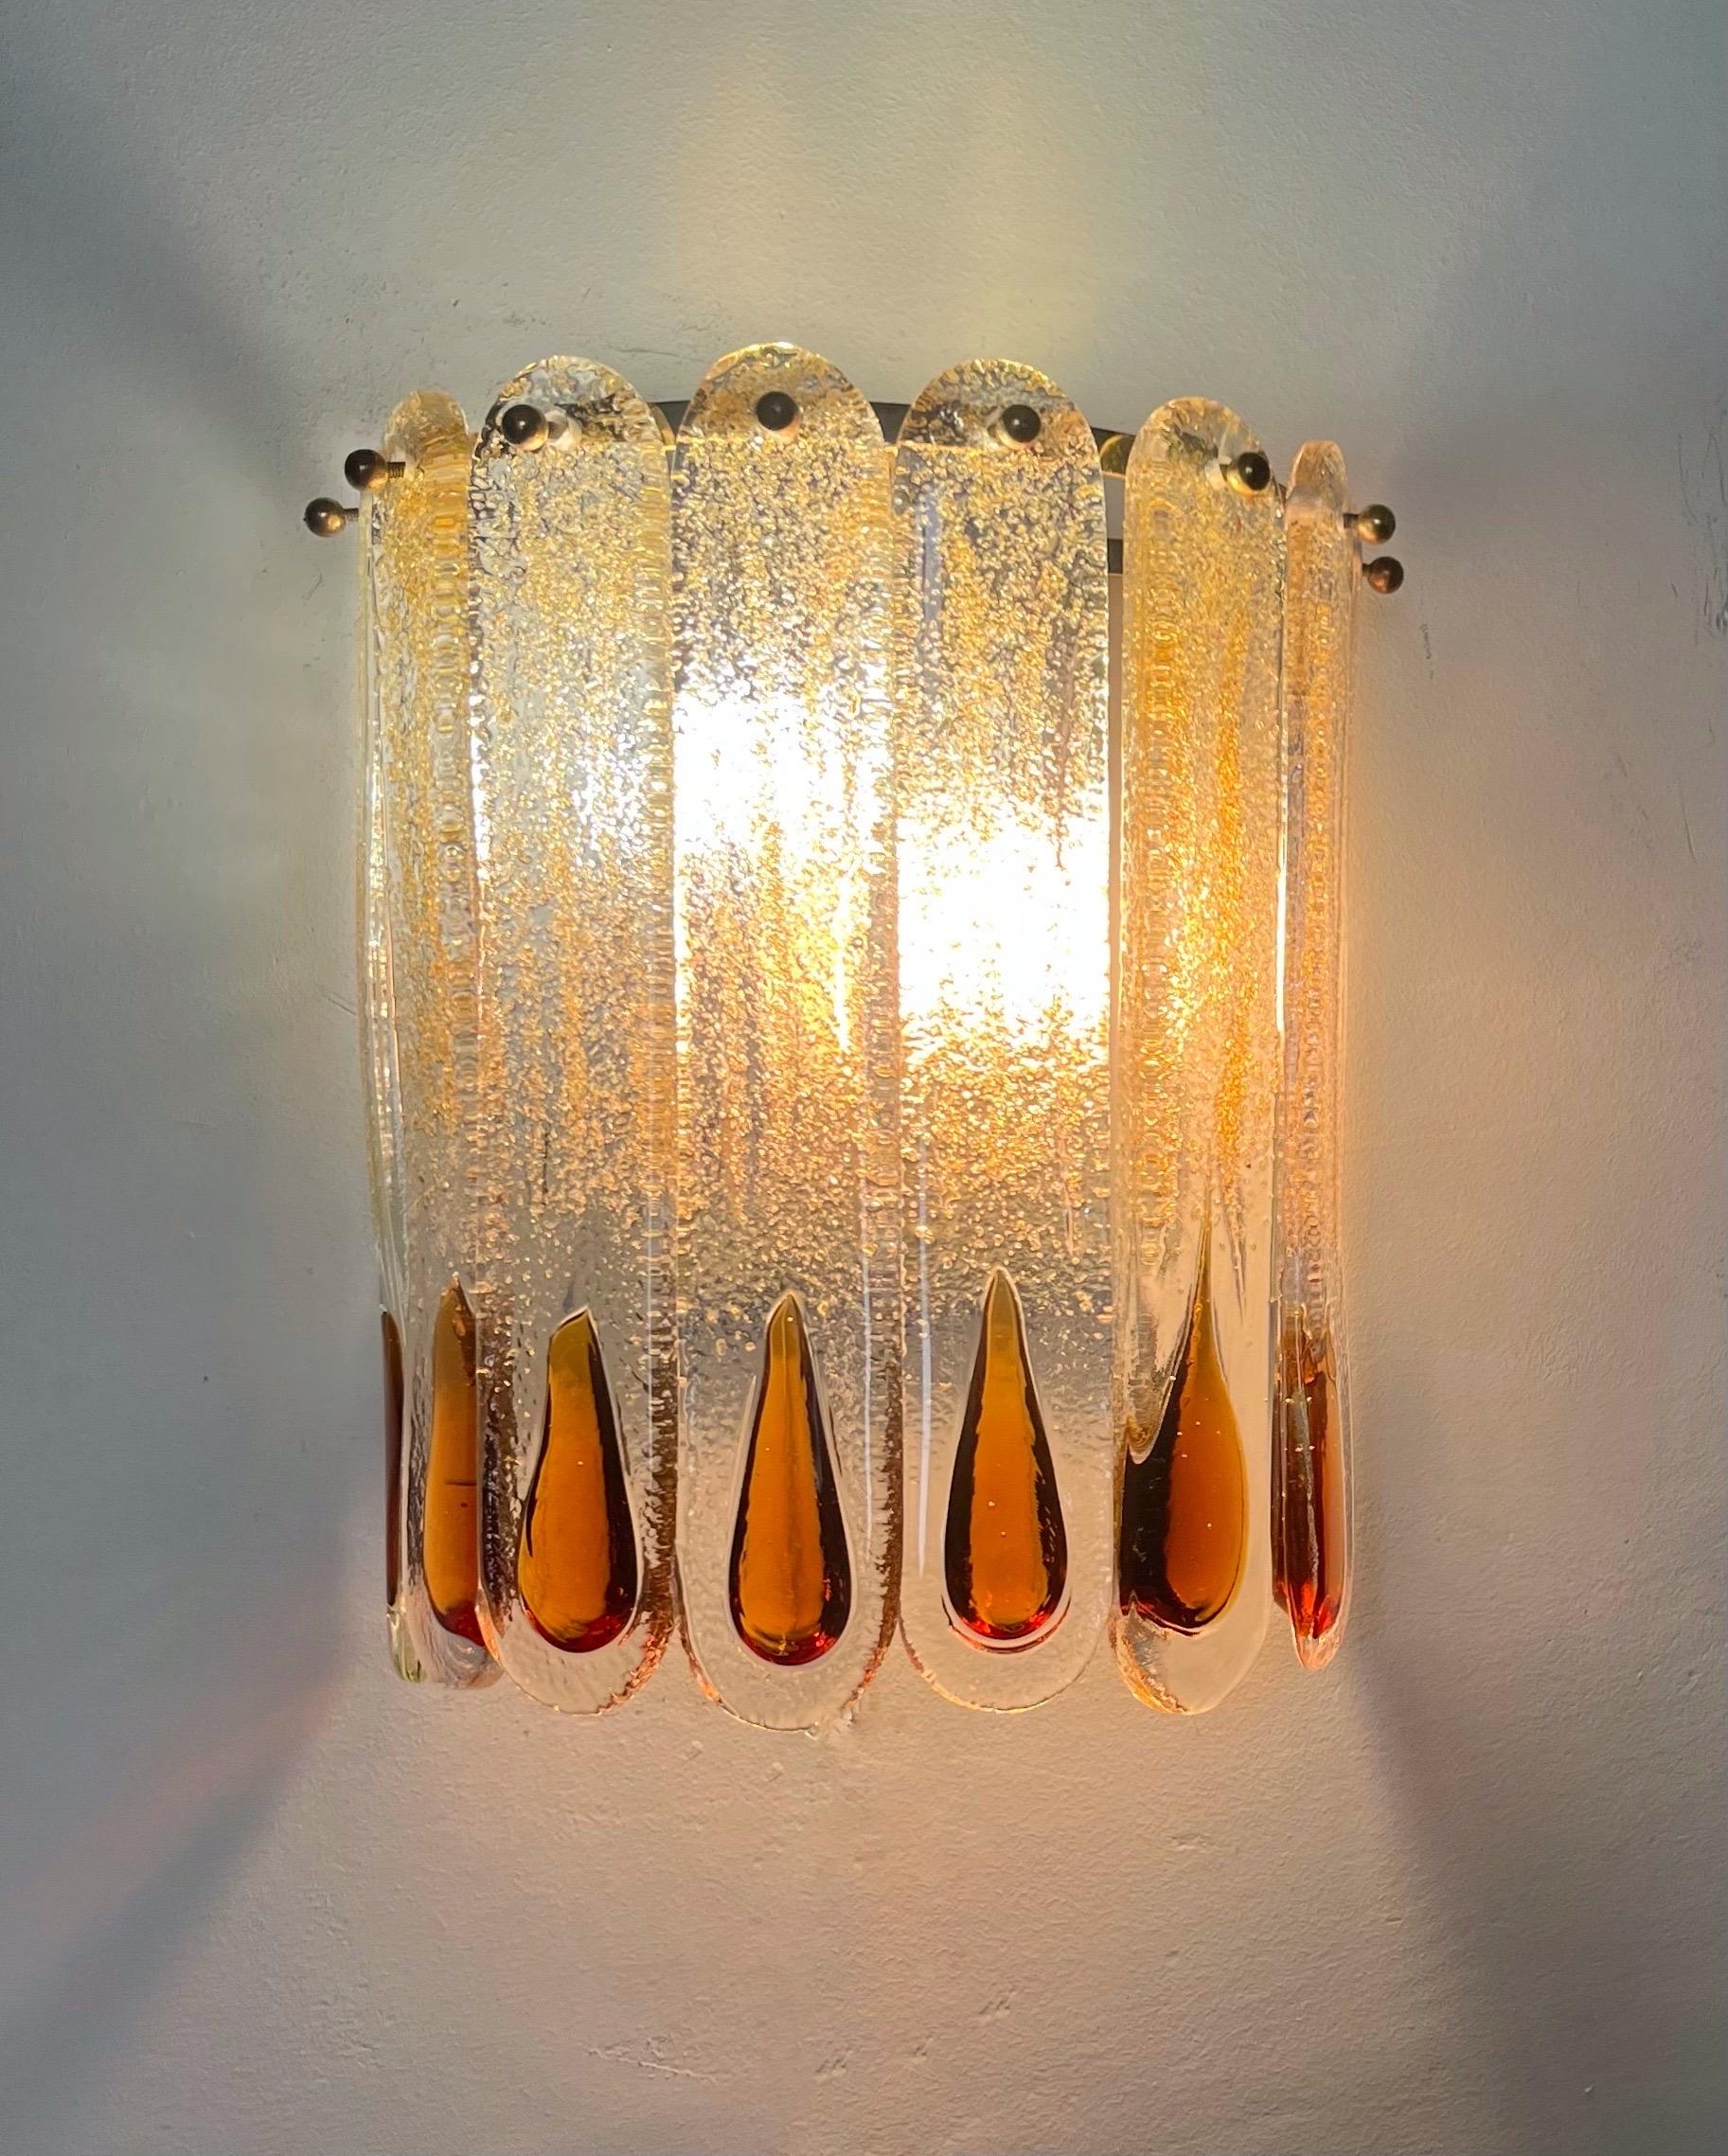 Stunning and beautiful Pair of Italian amber Murano glass Wall Sconces from 1970s.
These Wall Sconces were made during the 1970s in Italy for the Venice Company “Mazzega”.
Mazzega lie in the noble Venetian glassworking tradition; the firm was